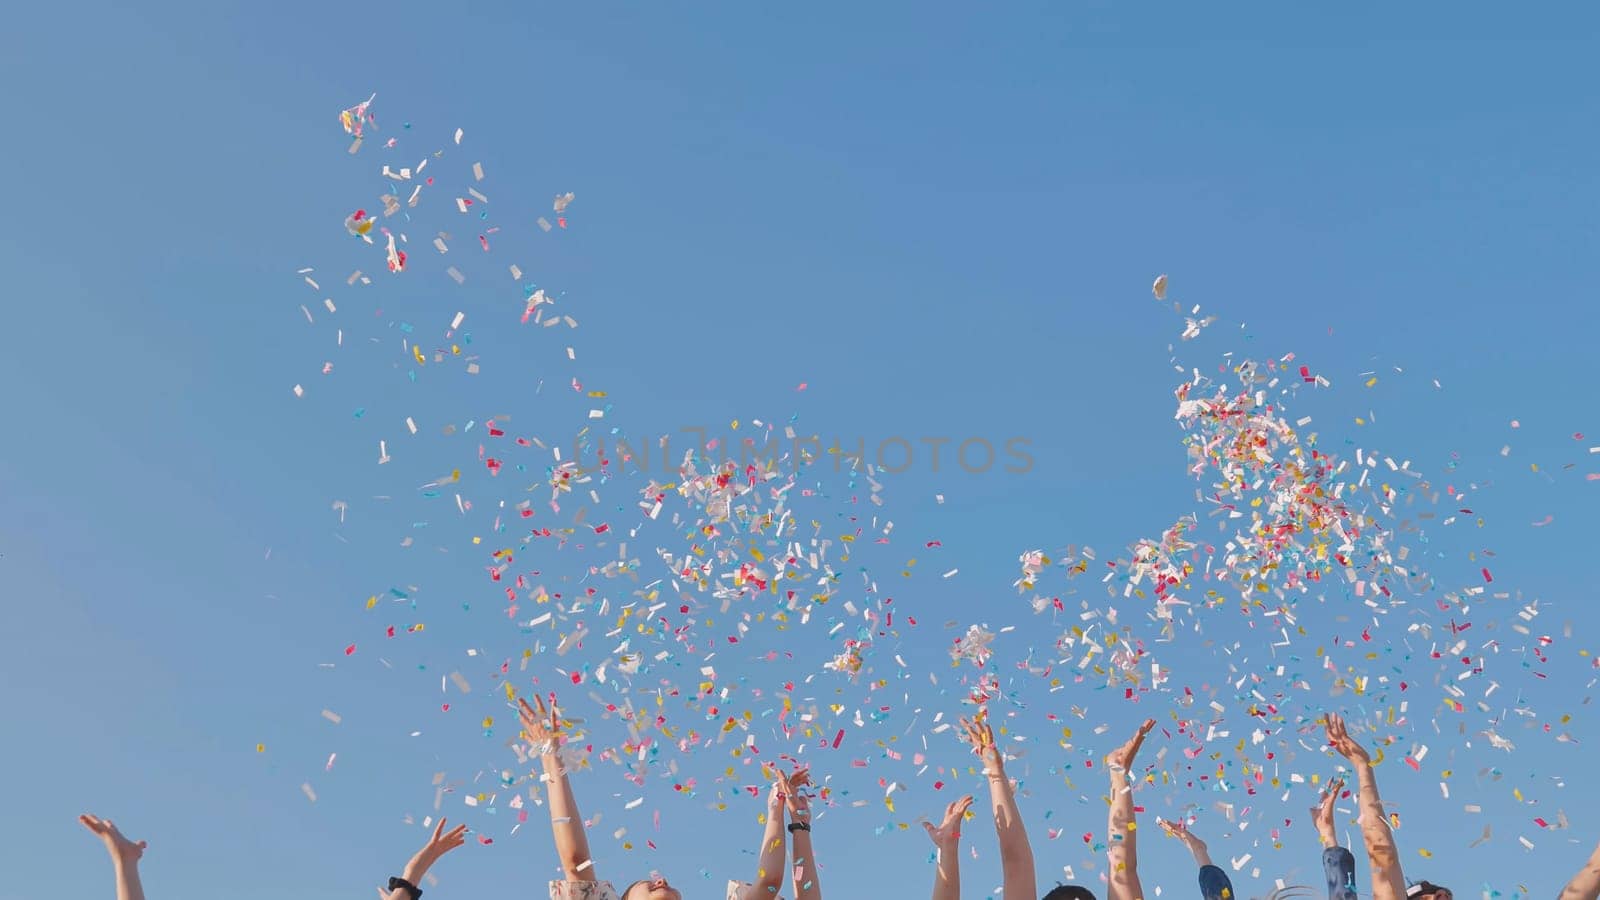 Tossing colorful paper confetti from the hands of young people. by DovidPro